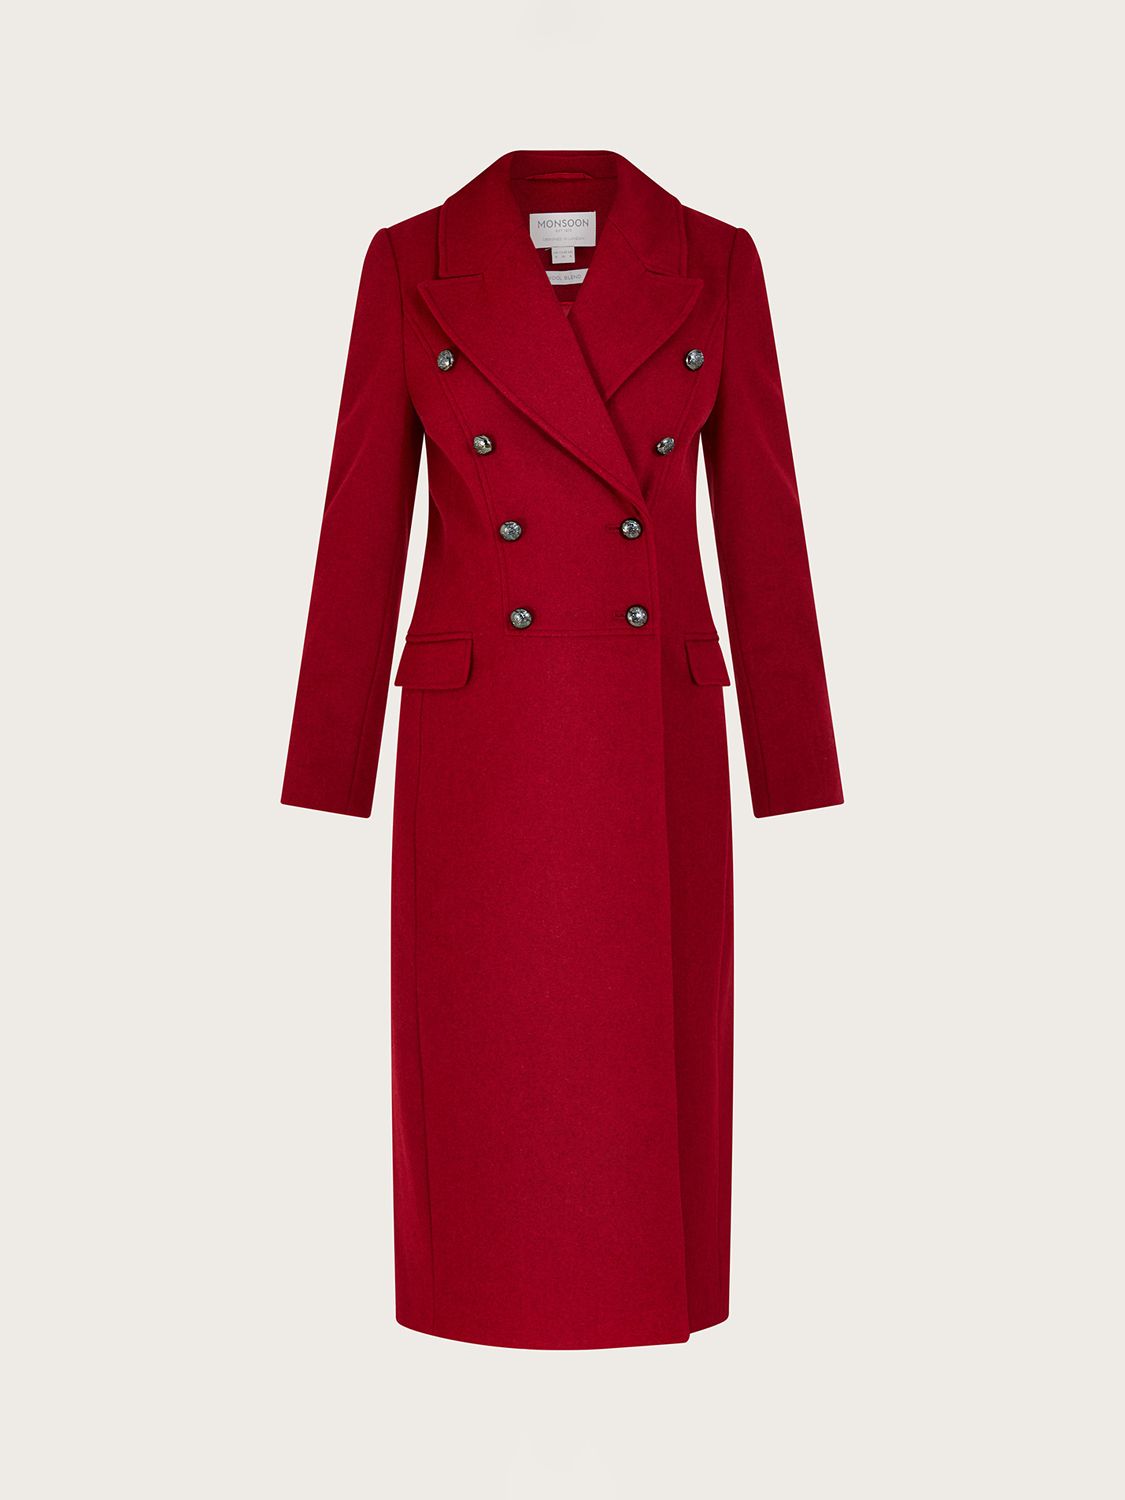 Monsoon Daria Double Breasted Coat, Red at John Lewis & Partners